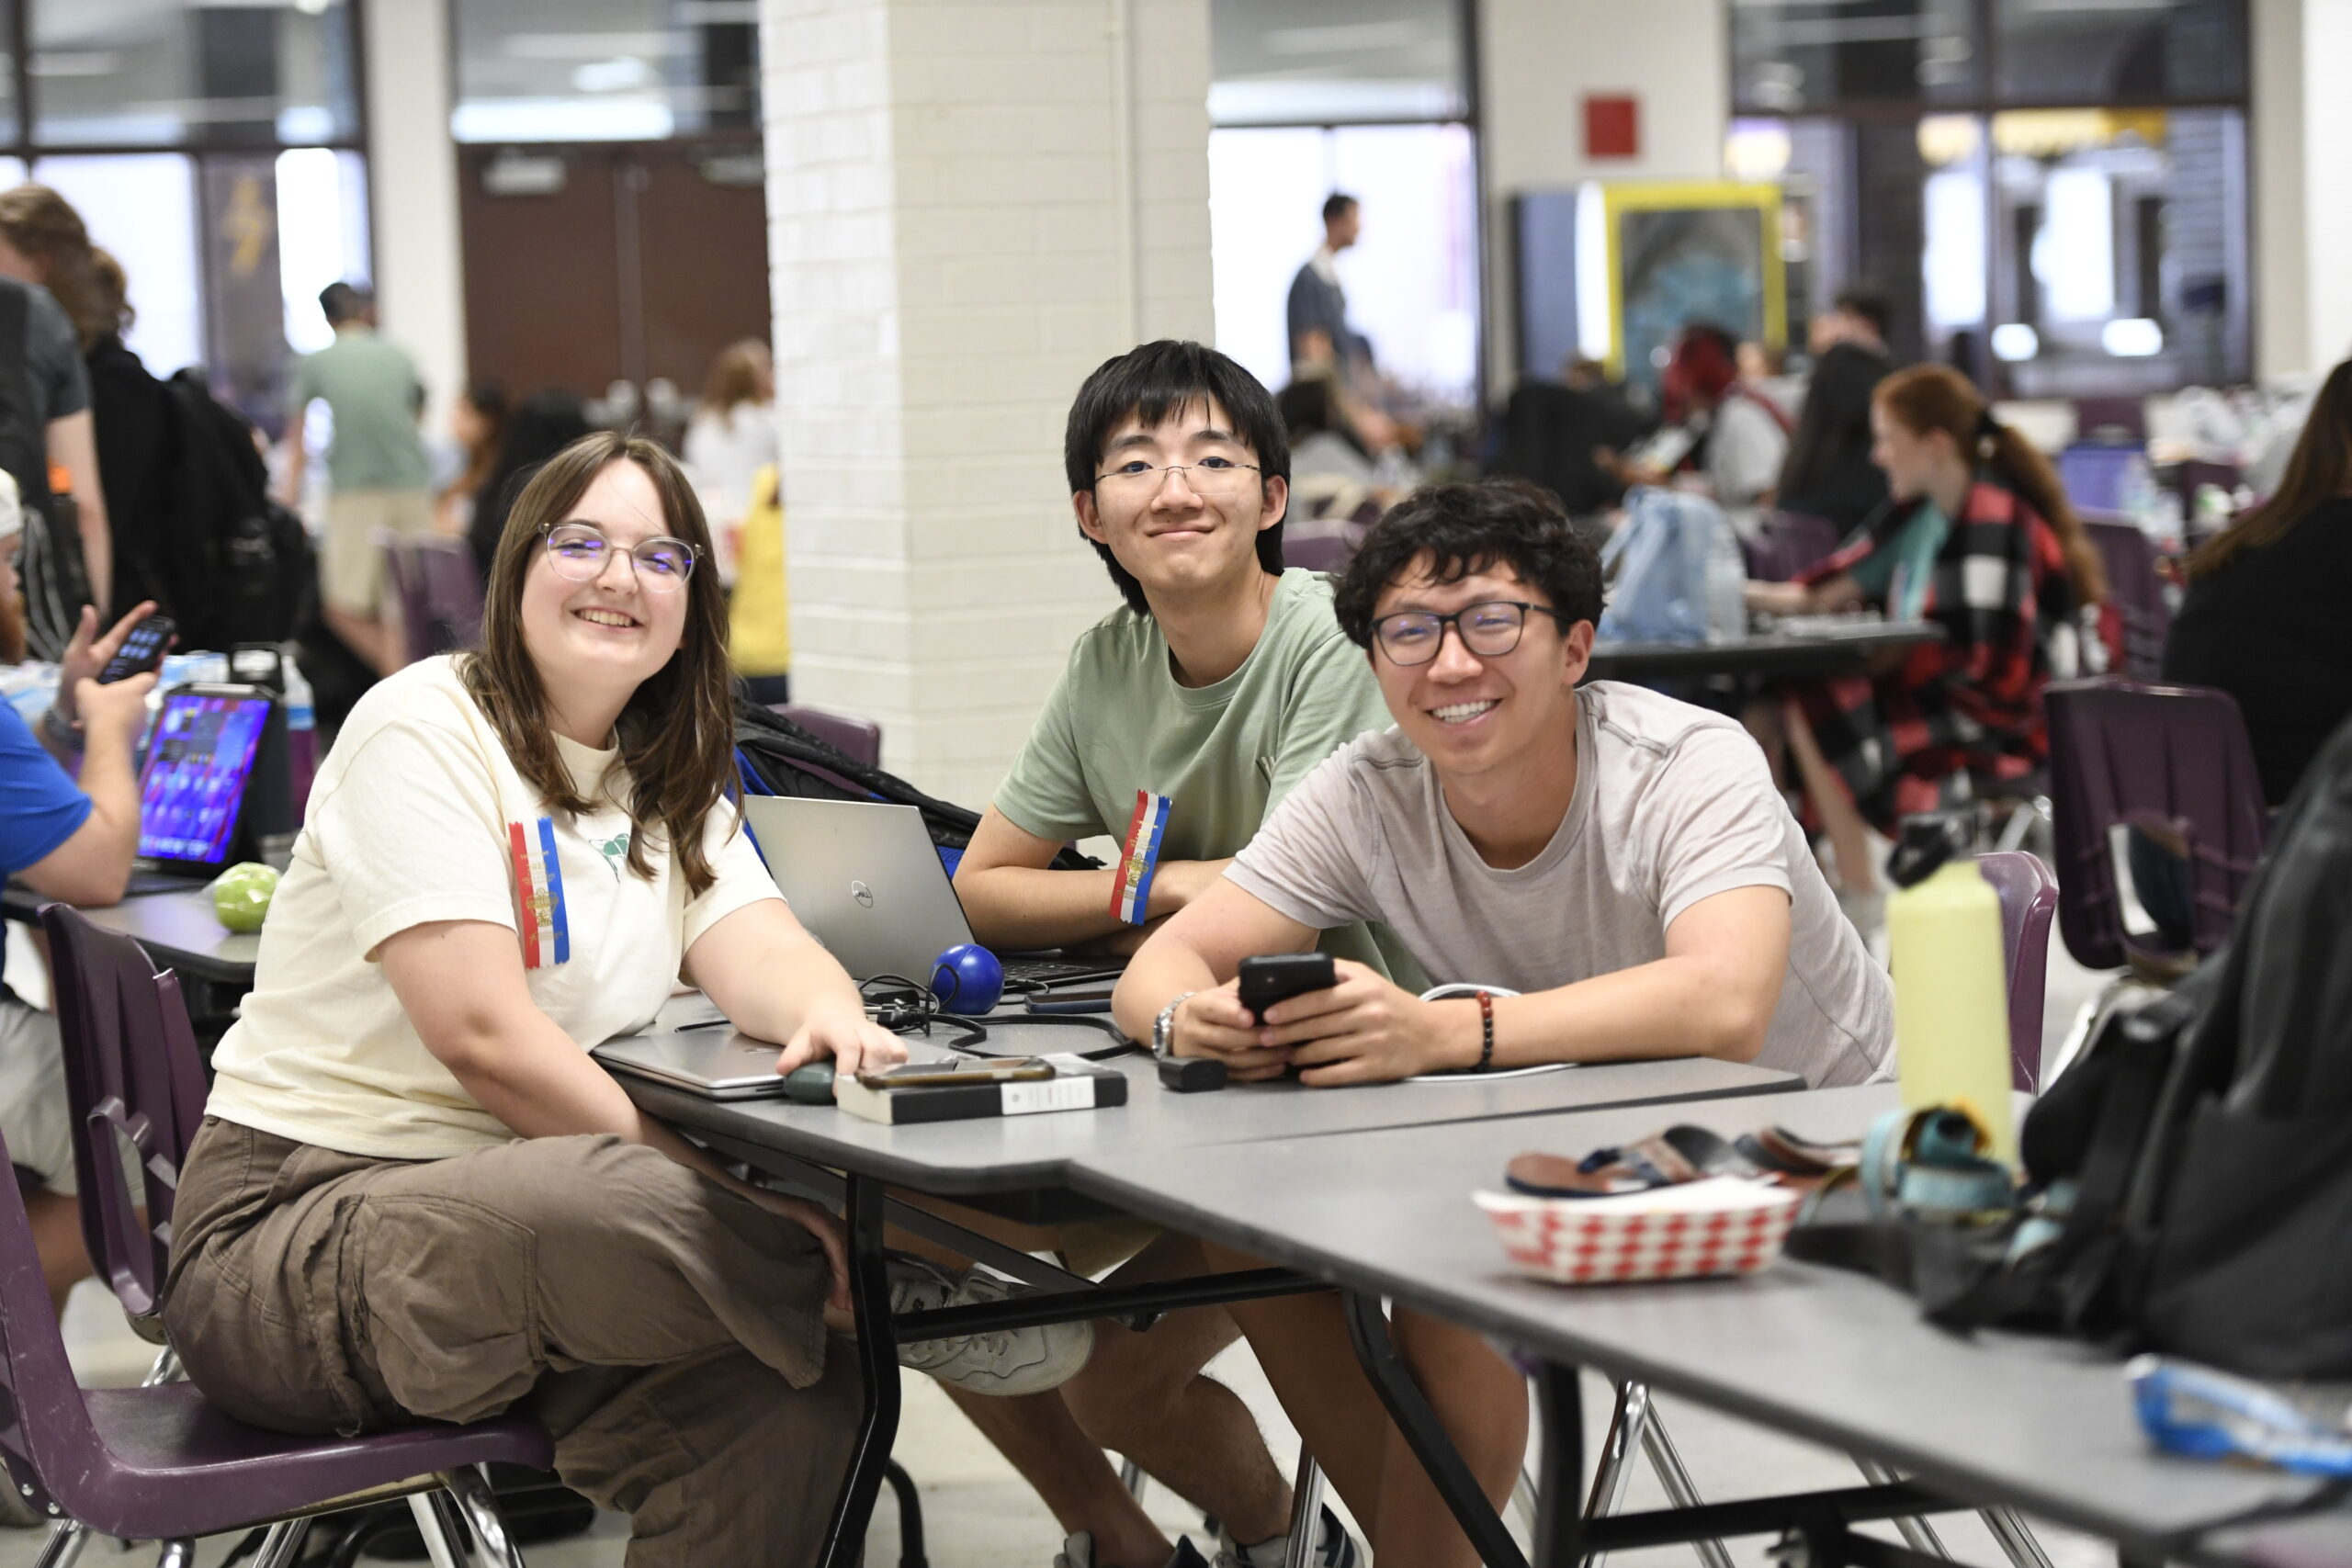 Three students smiling at the camera sitting in a large room